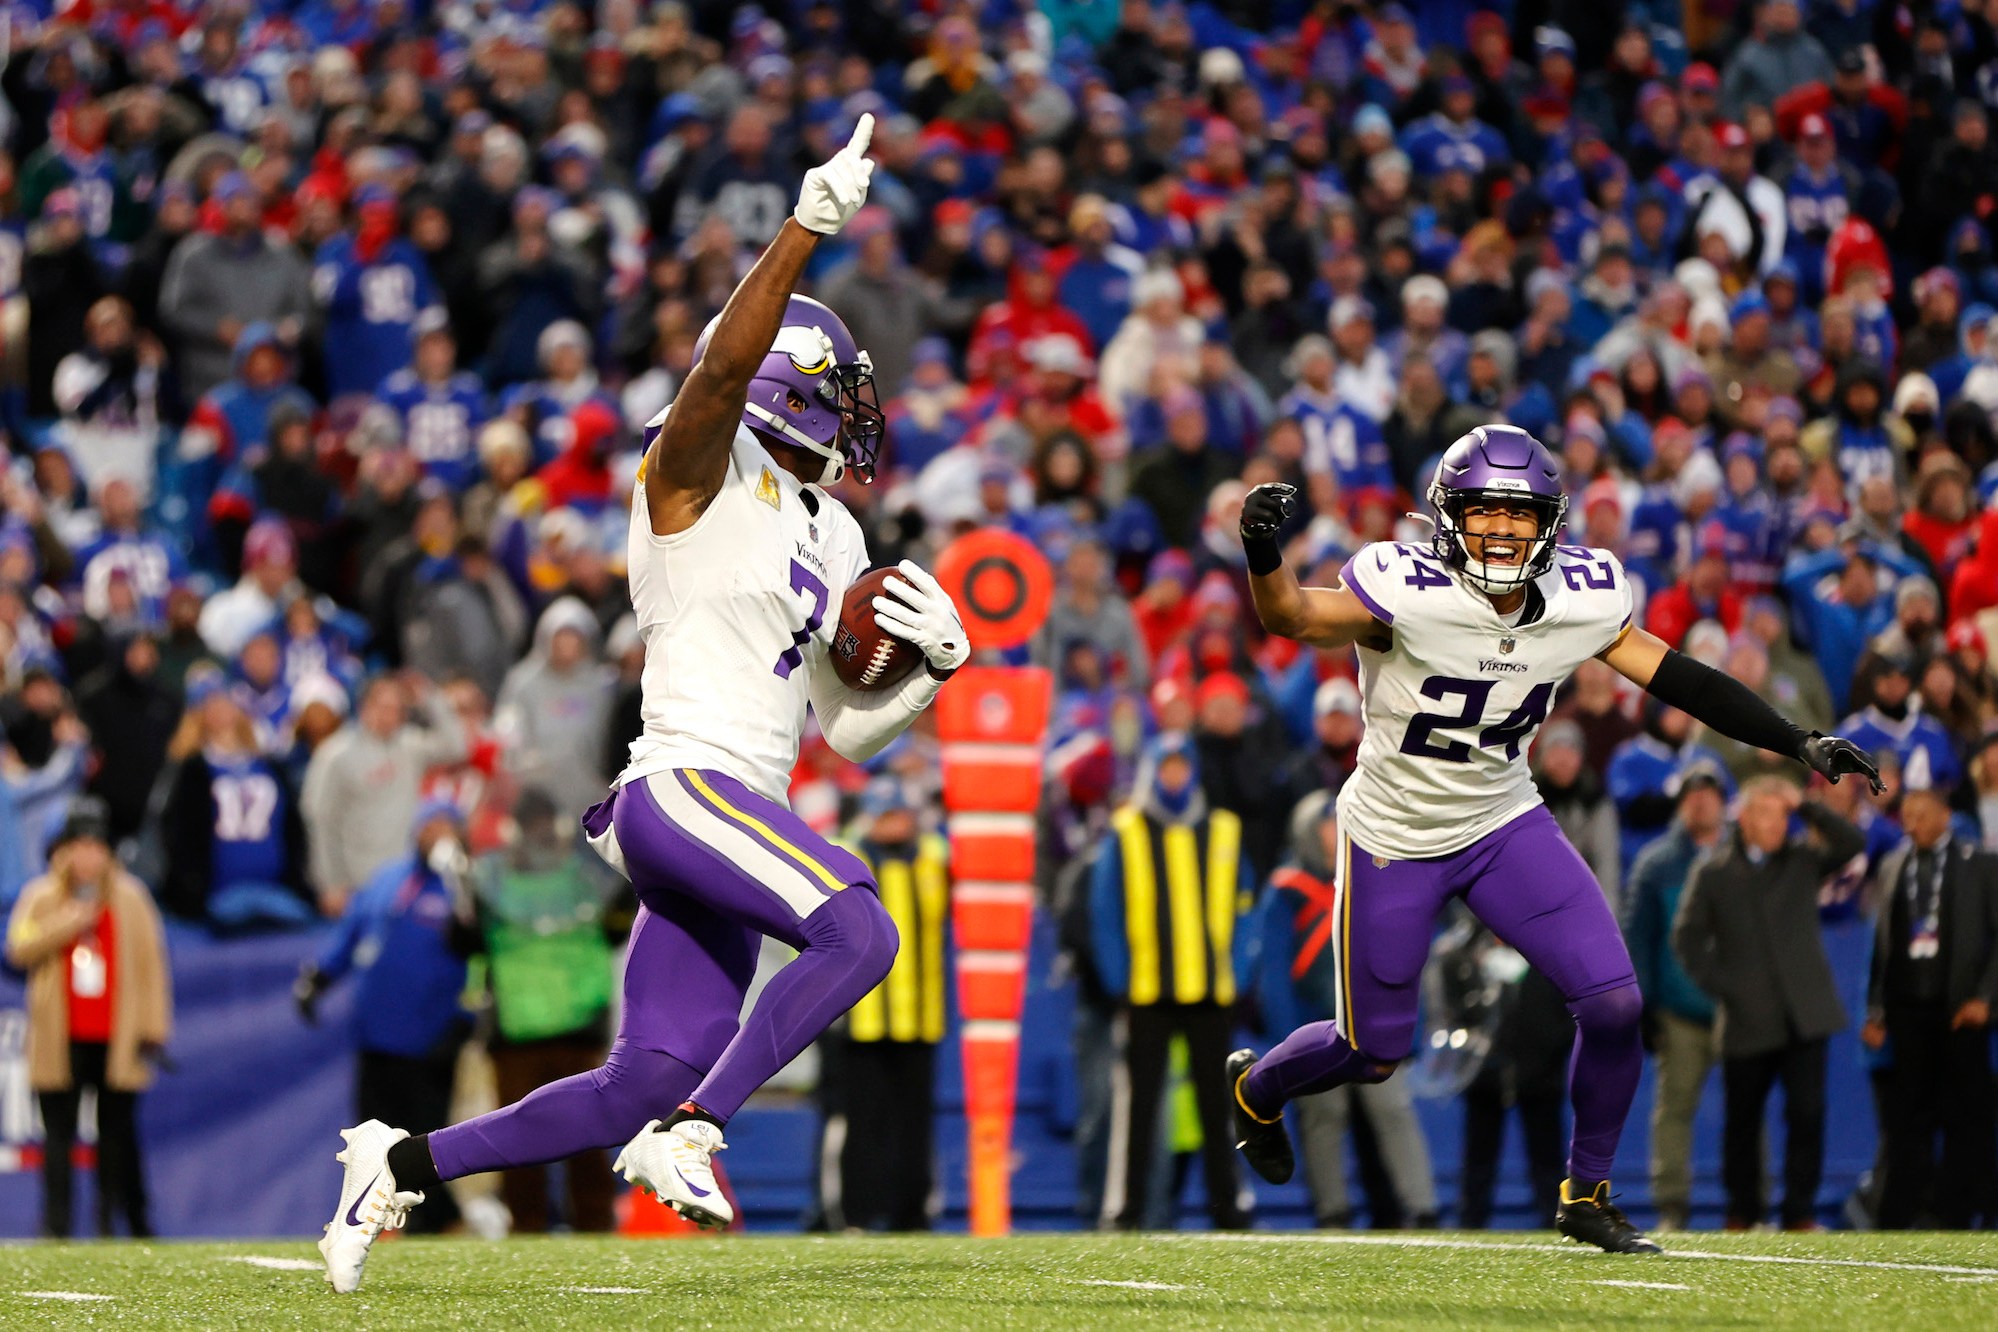 ORCHARD PARK, NEW YORK - NOVEMBER 13: Patrick Peterson #7 of the Minnesota Vikings and Camryn Bynum #24 of the Minnesota Vikings celebrate after Peterson's game winning interception in overtime against the Buffalo Bills at Highmark Stadium on November 13, 2022 in Orchard Park, New York. (Photo by Isaiah Vazquez/Getty Images)